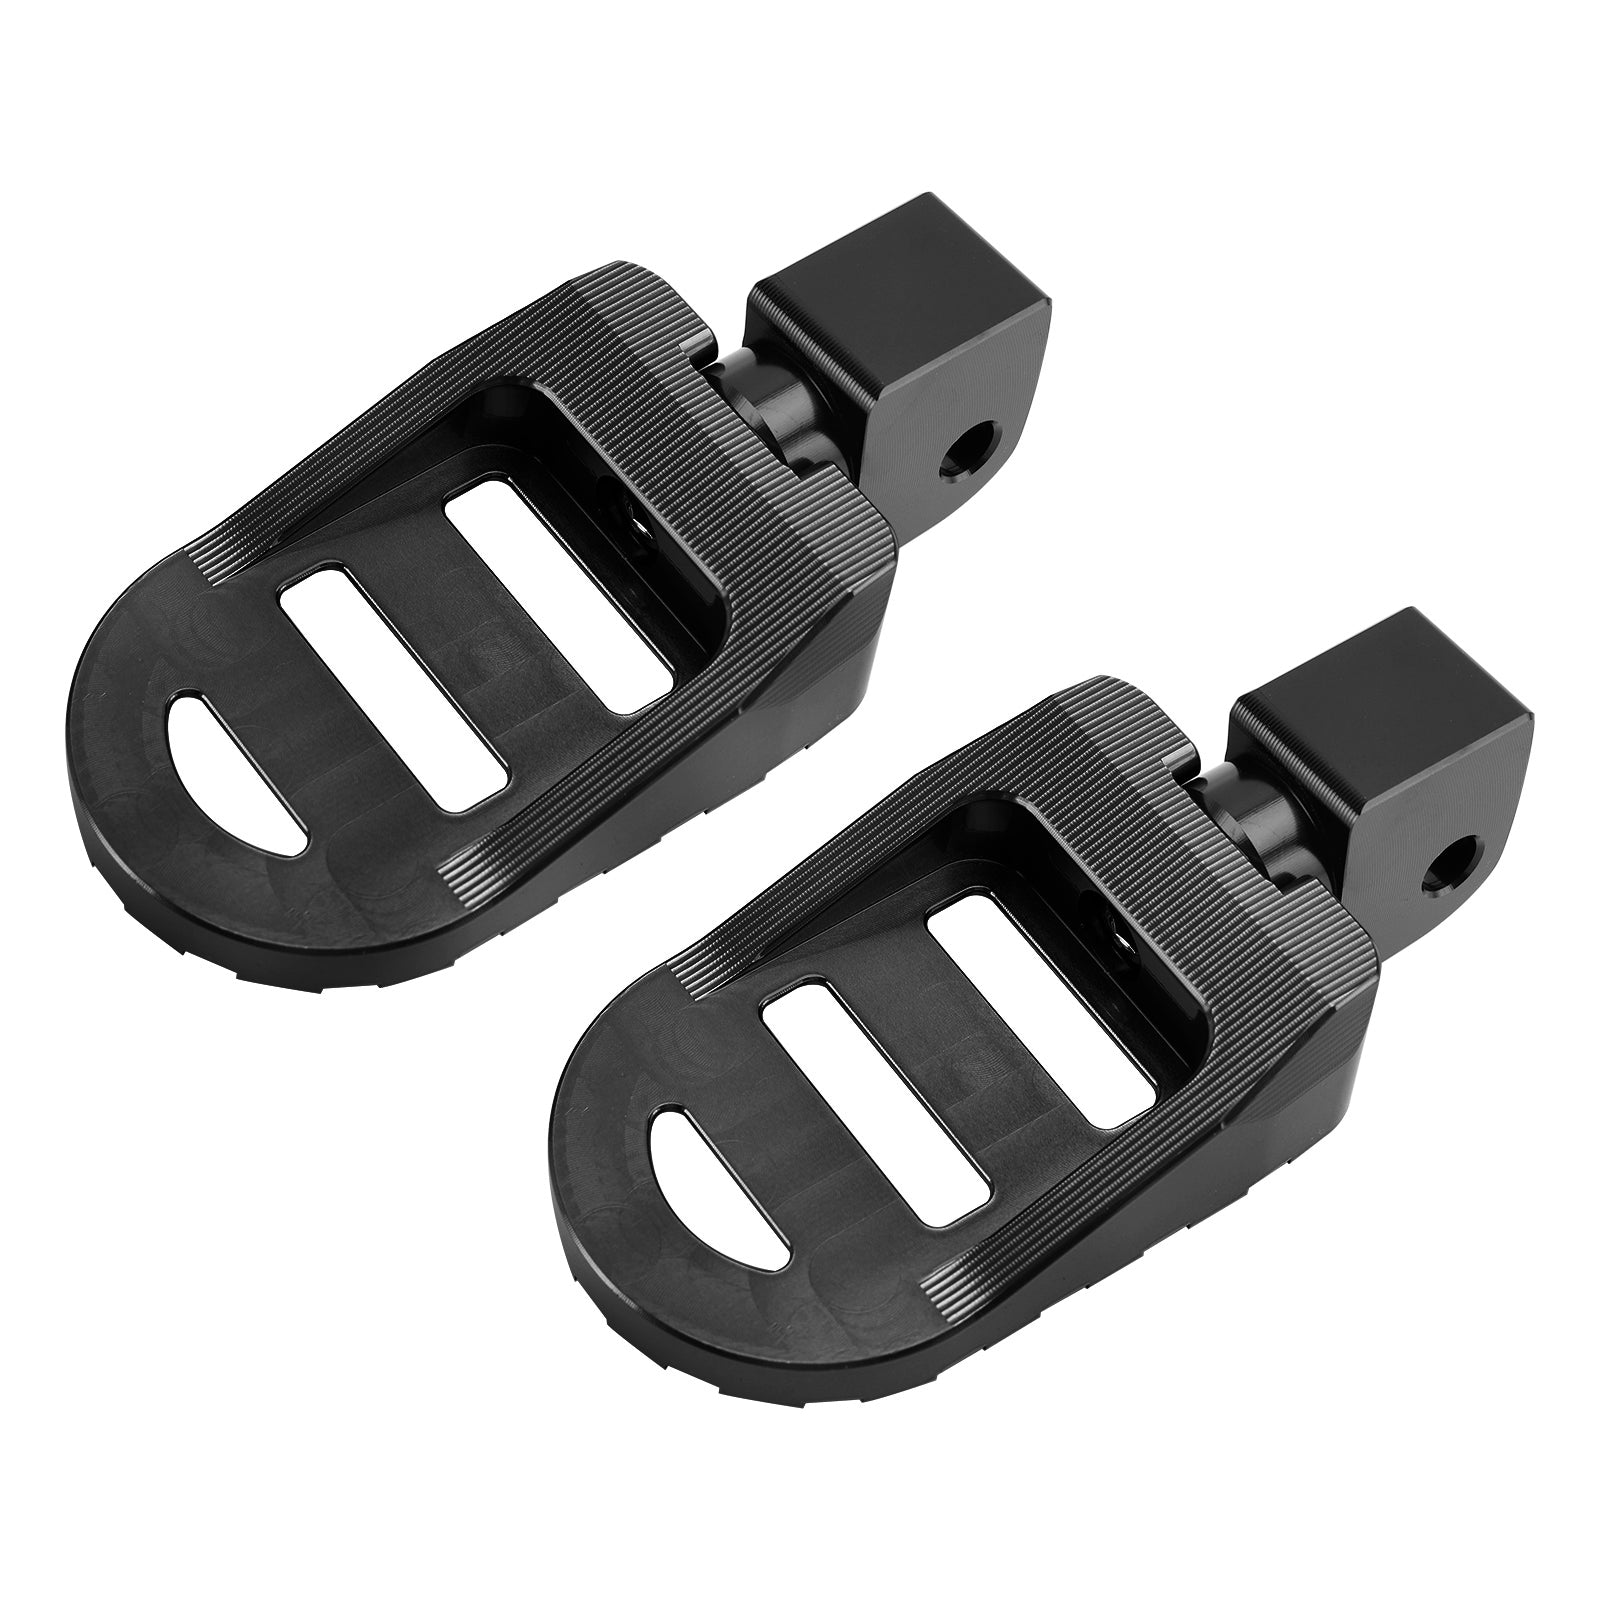 21-23 Meteor 350 & 22-23 Classic 350 & All Years New Bullet 350 Front Footrests Foot Peg